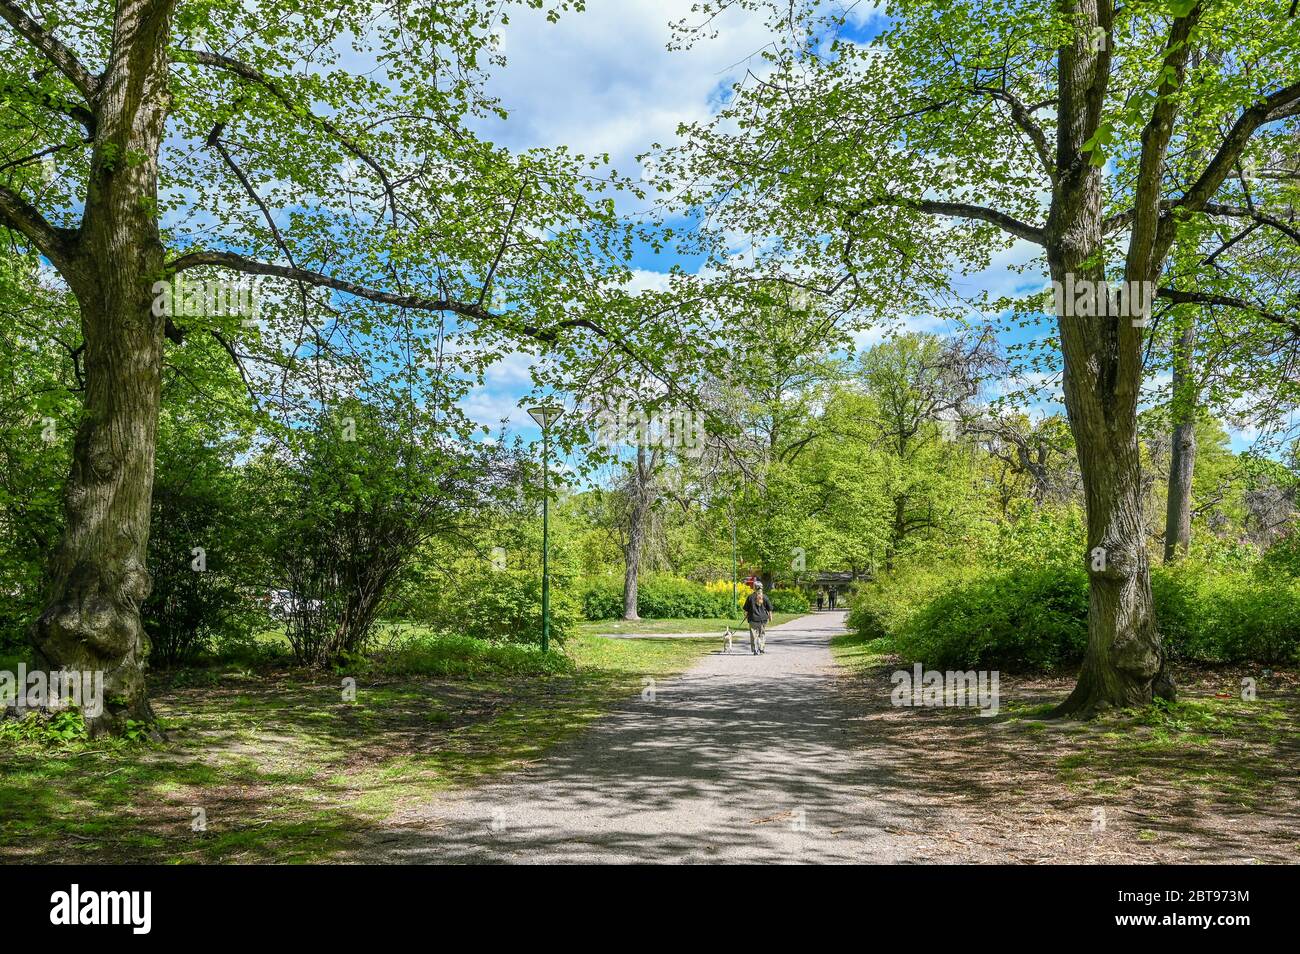 Unrecognizable person walks a dog in city park Folkparken during on a sunny day in May. Norrkoping is a historic industrial town in Sweden. Stock Photo